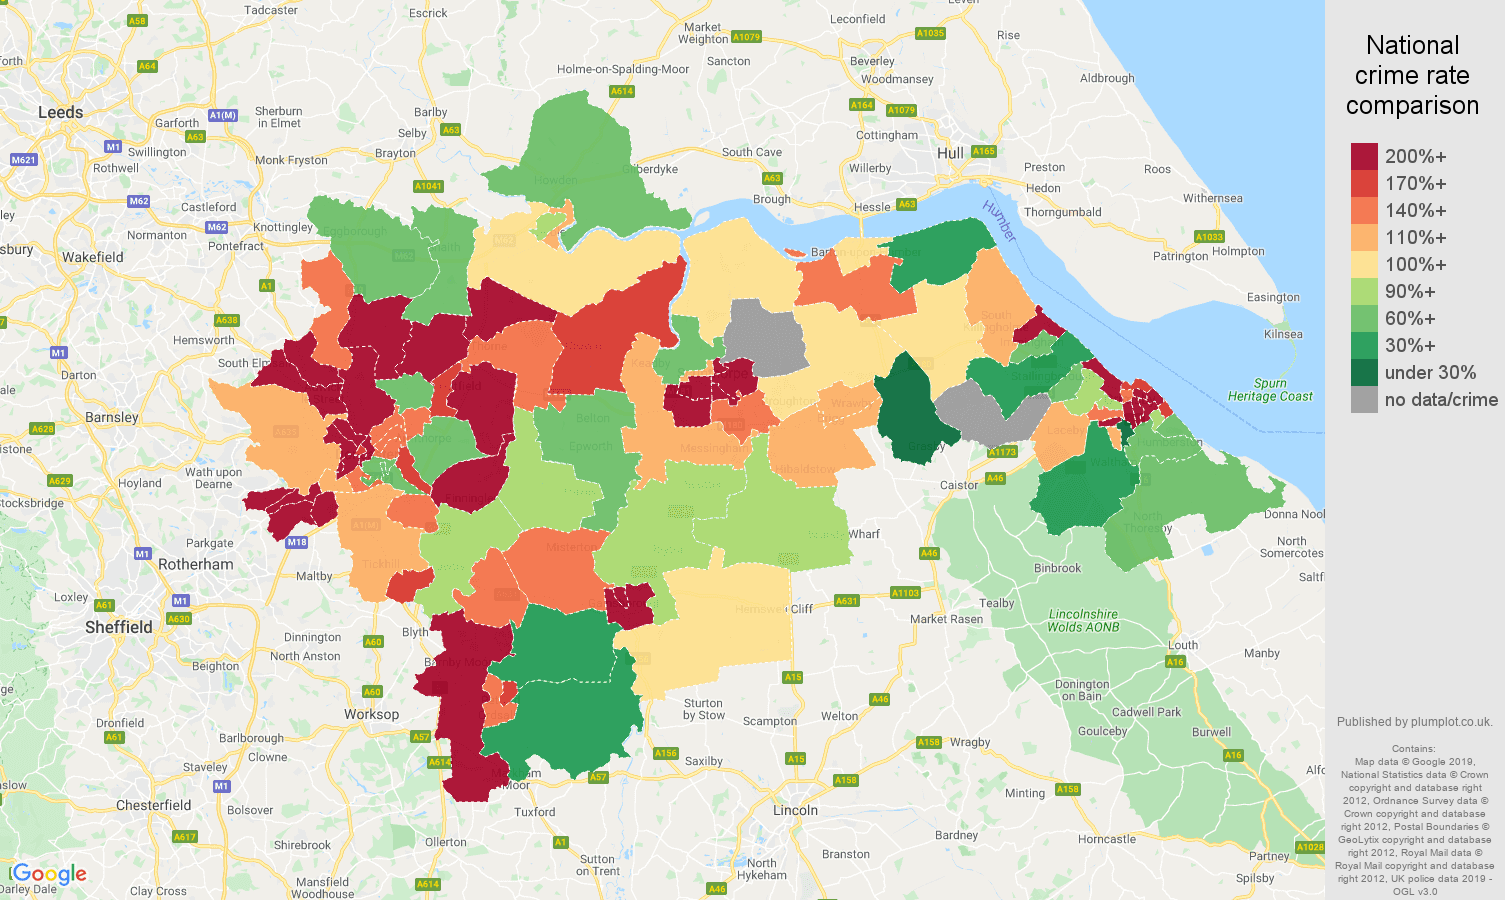 Doncaster other crime rate comparison map